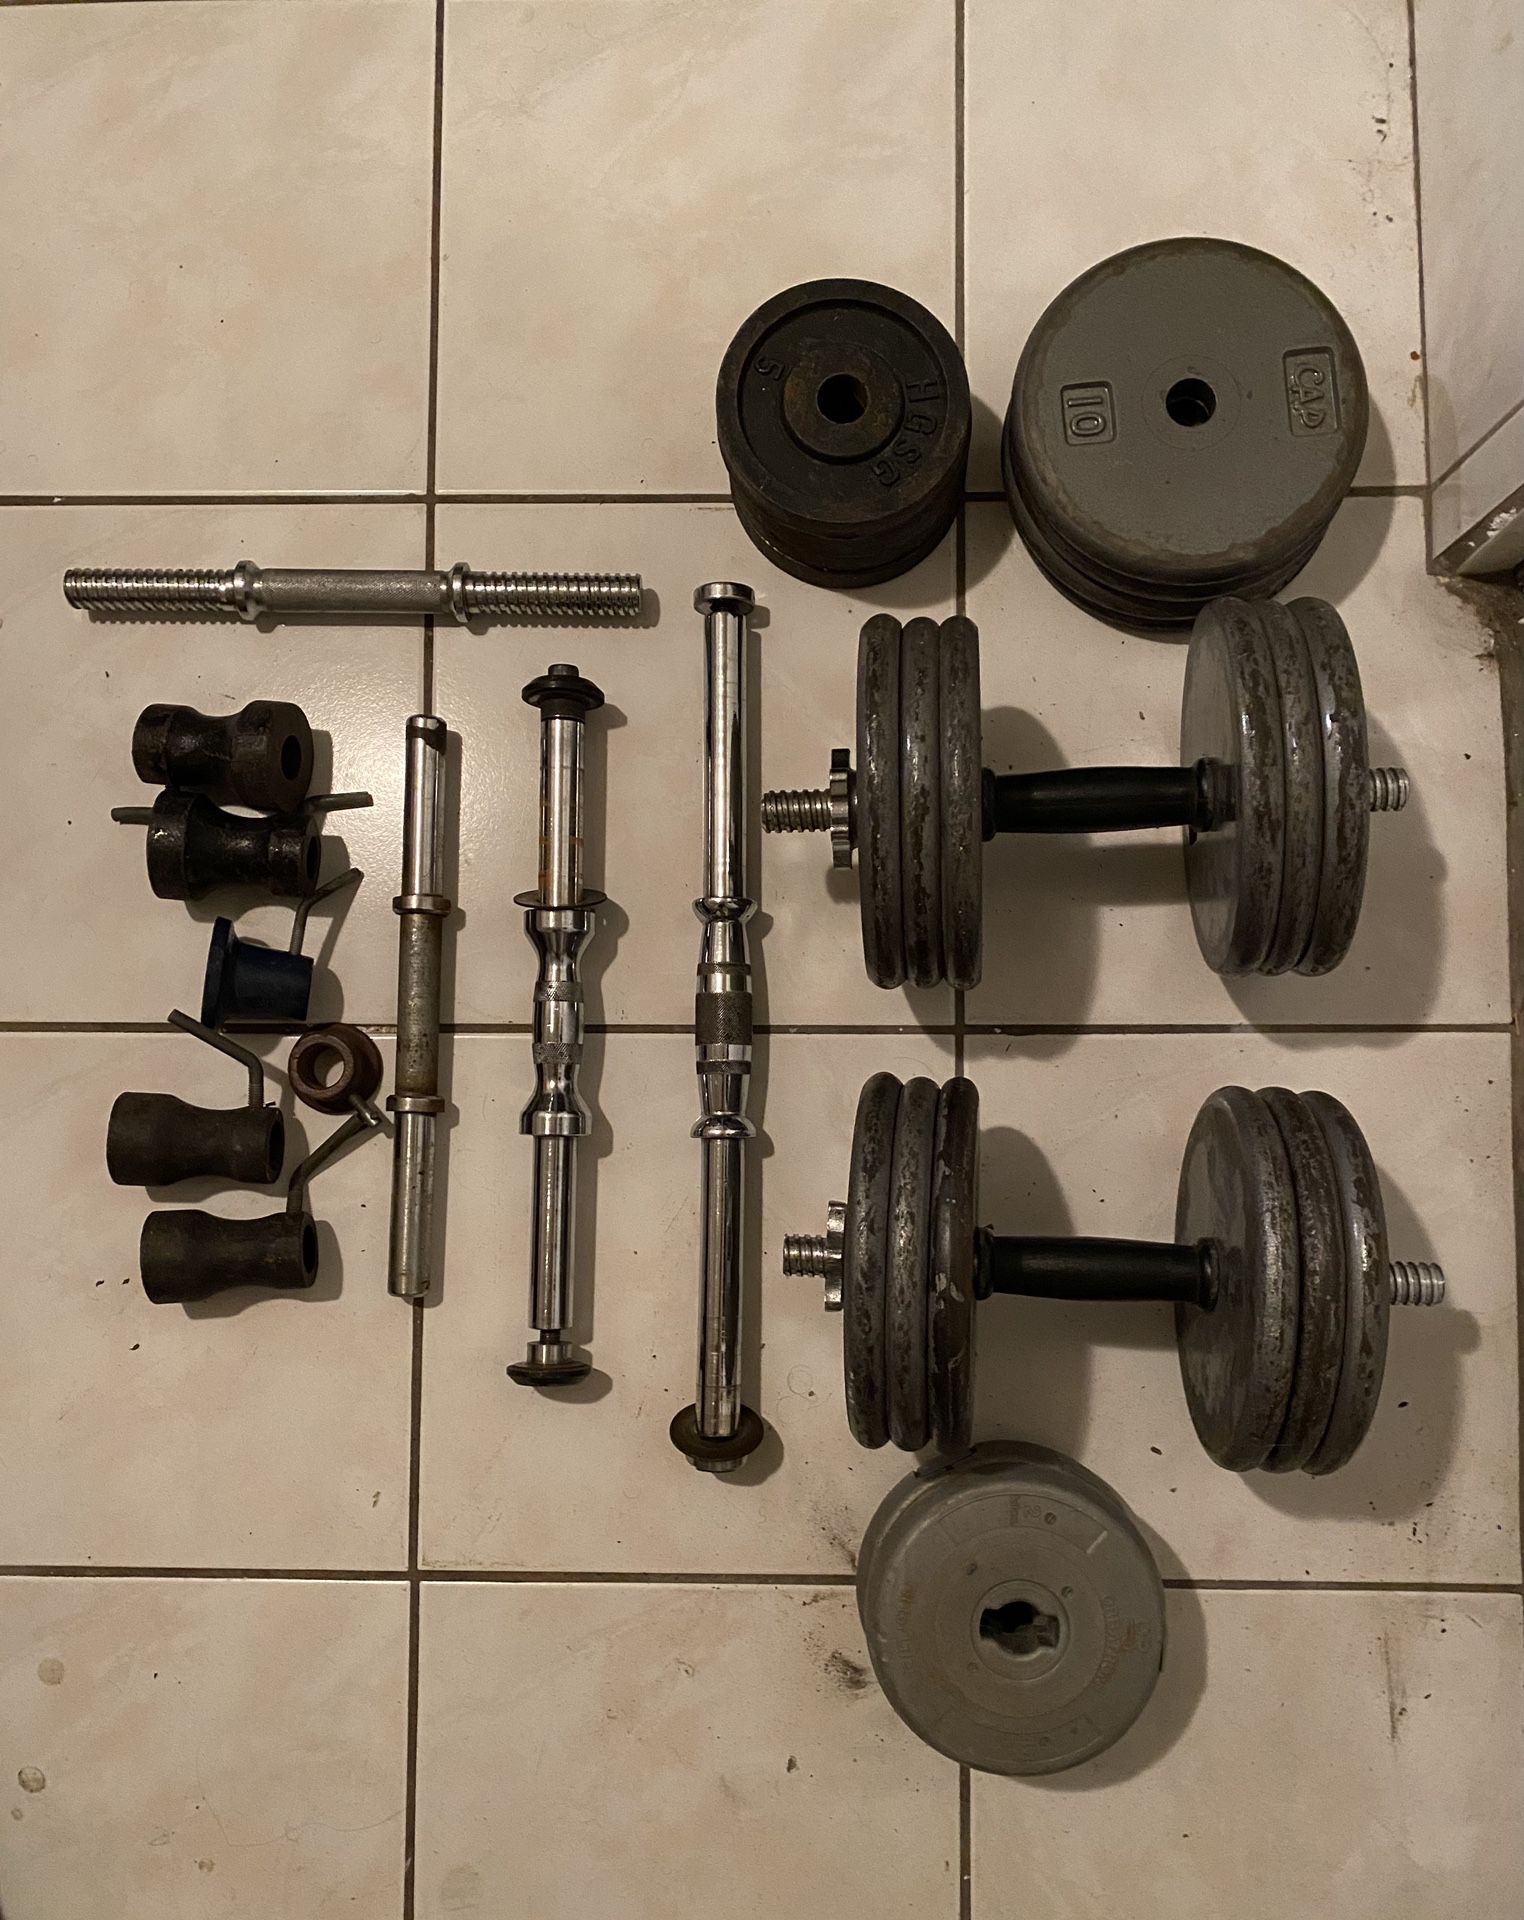 Dumbbell Set - Over 180lbs